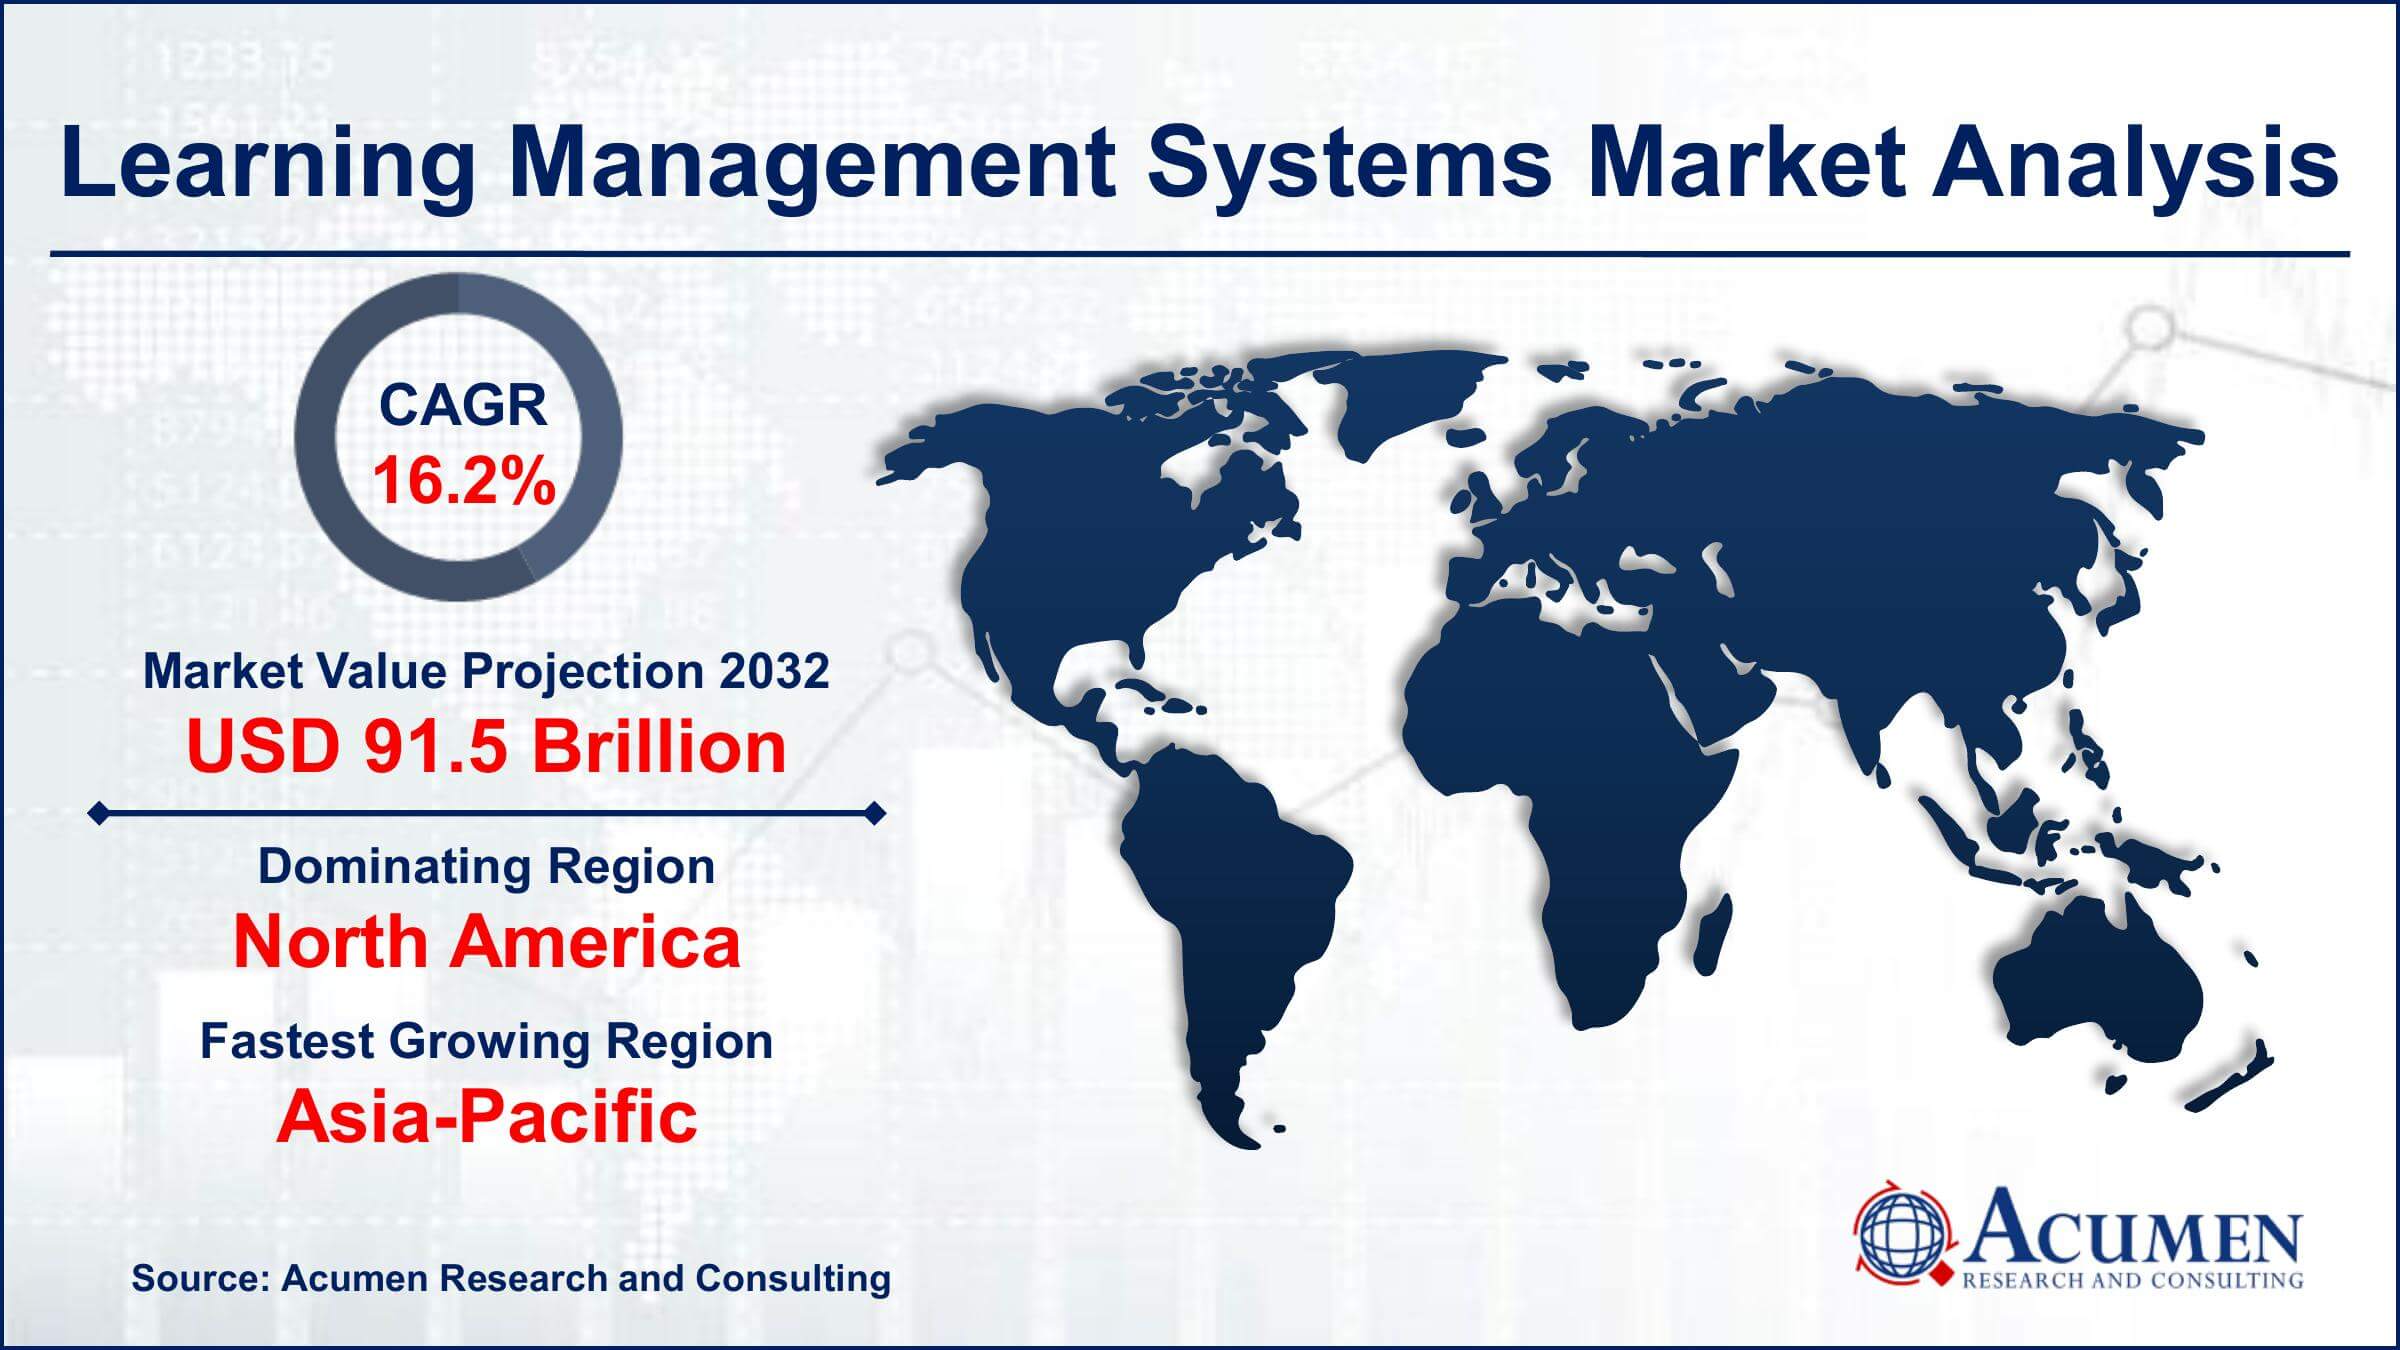 Global Learning Management Systems Market Trends